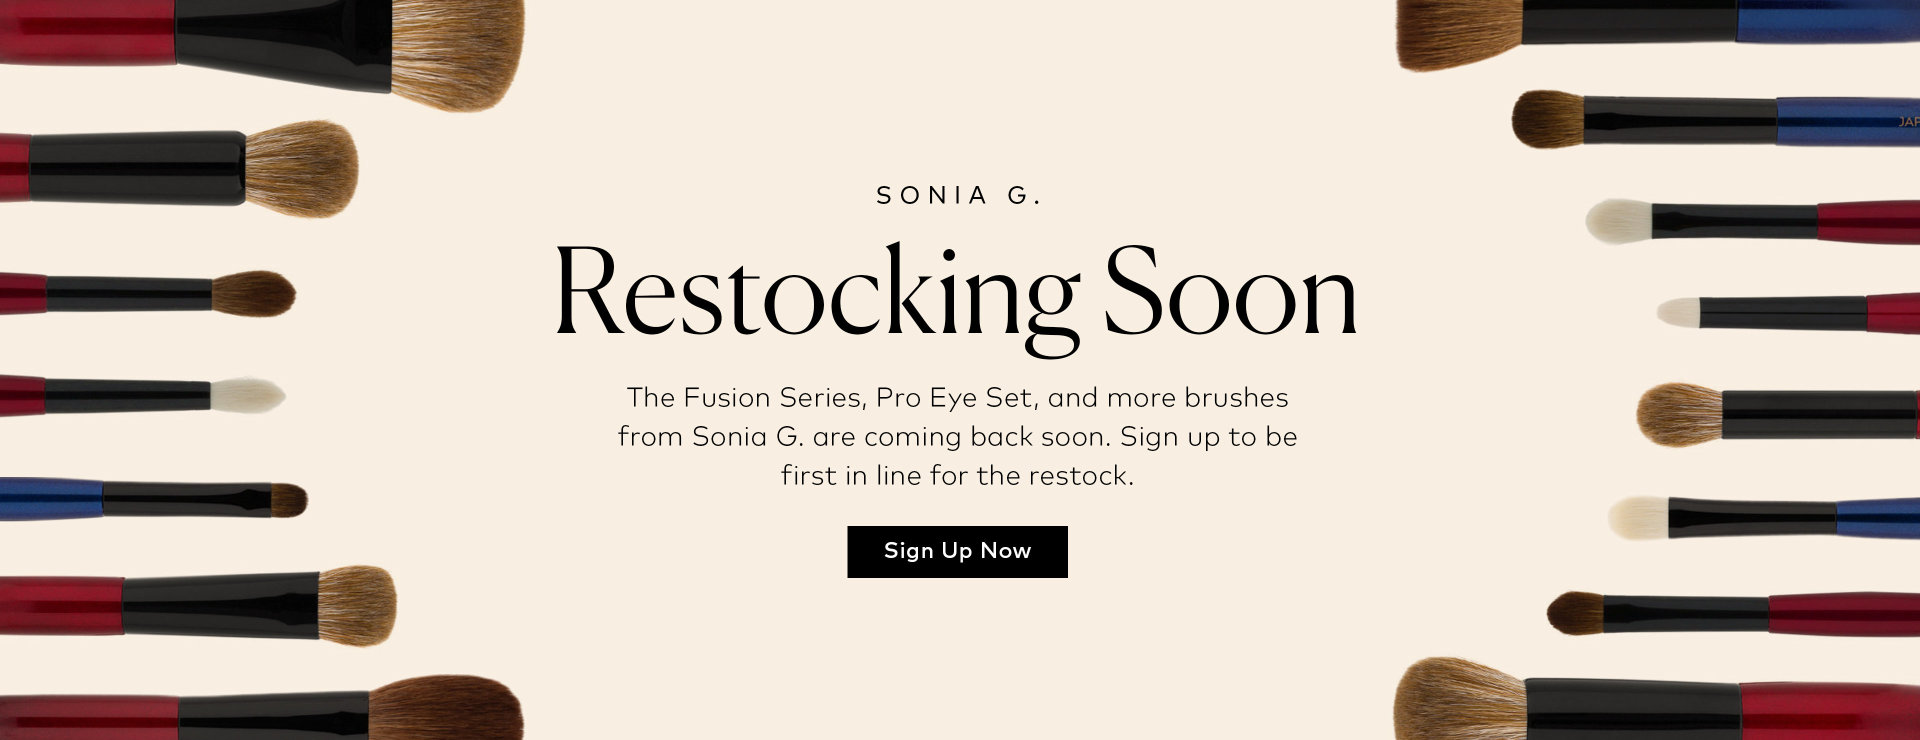 Be first in line for the Sonia G. restock. Sign up here for notifications.